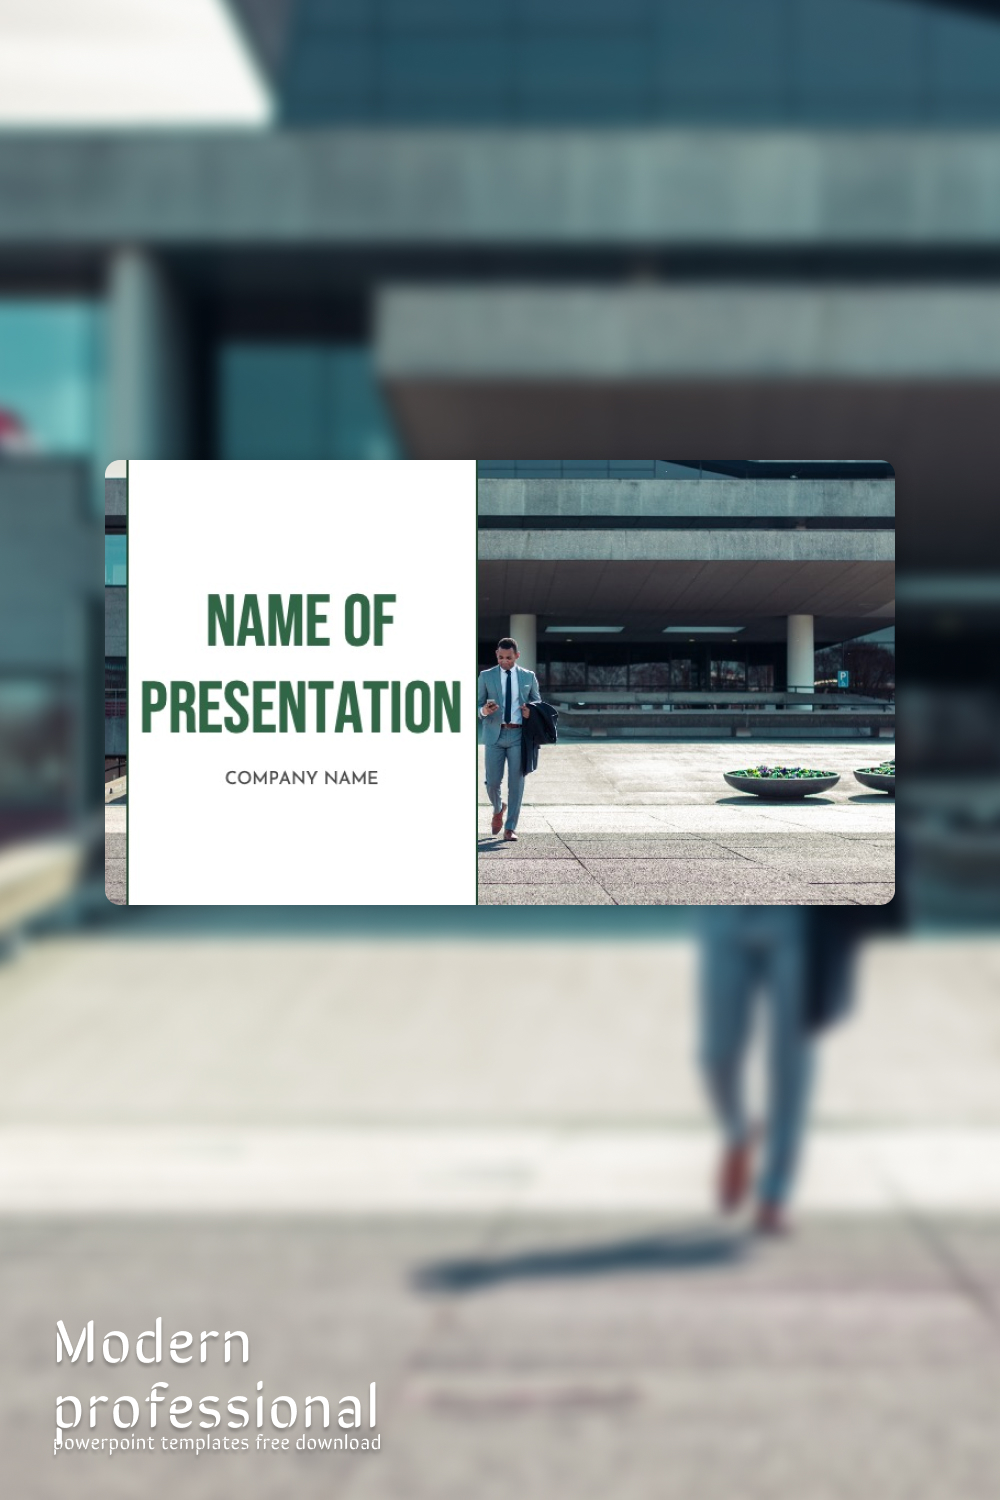 Modern professional powerpoint templates free download of pinterest.